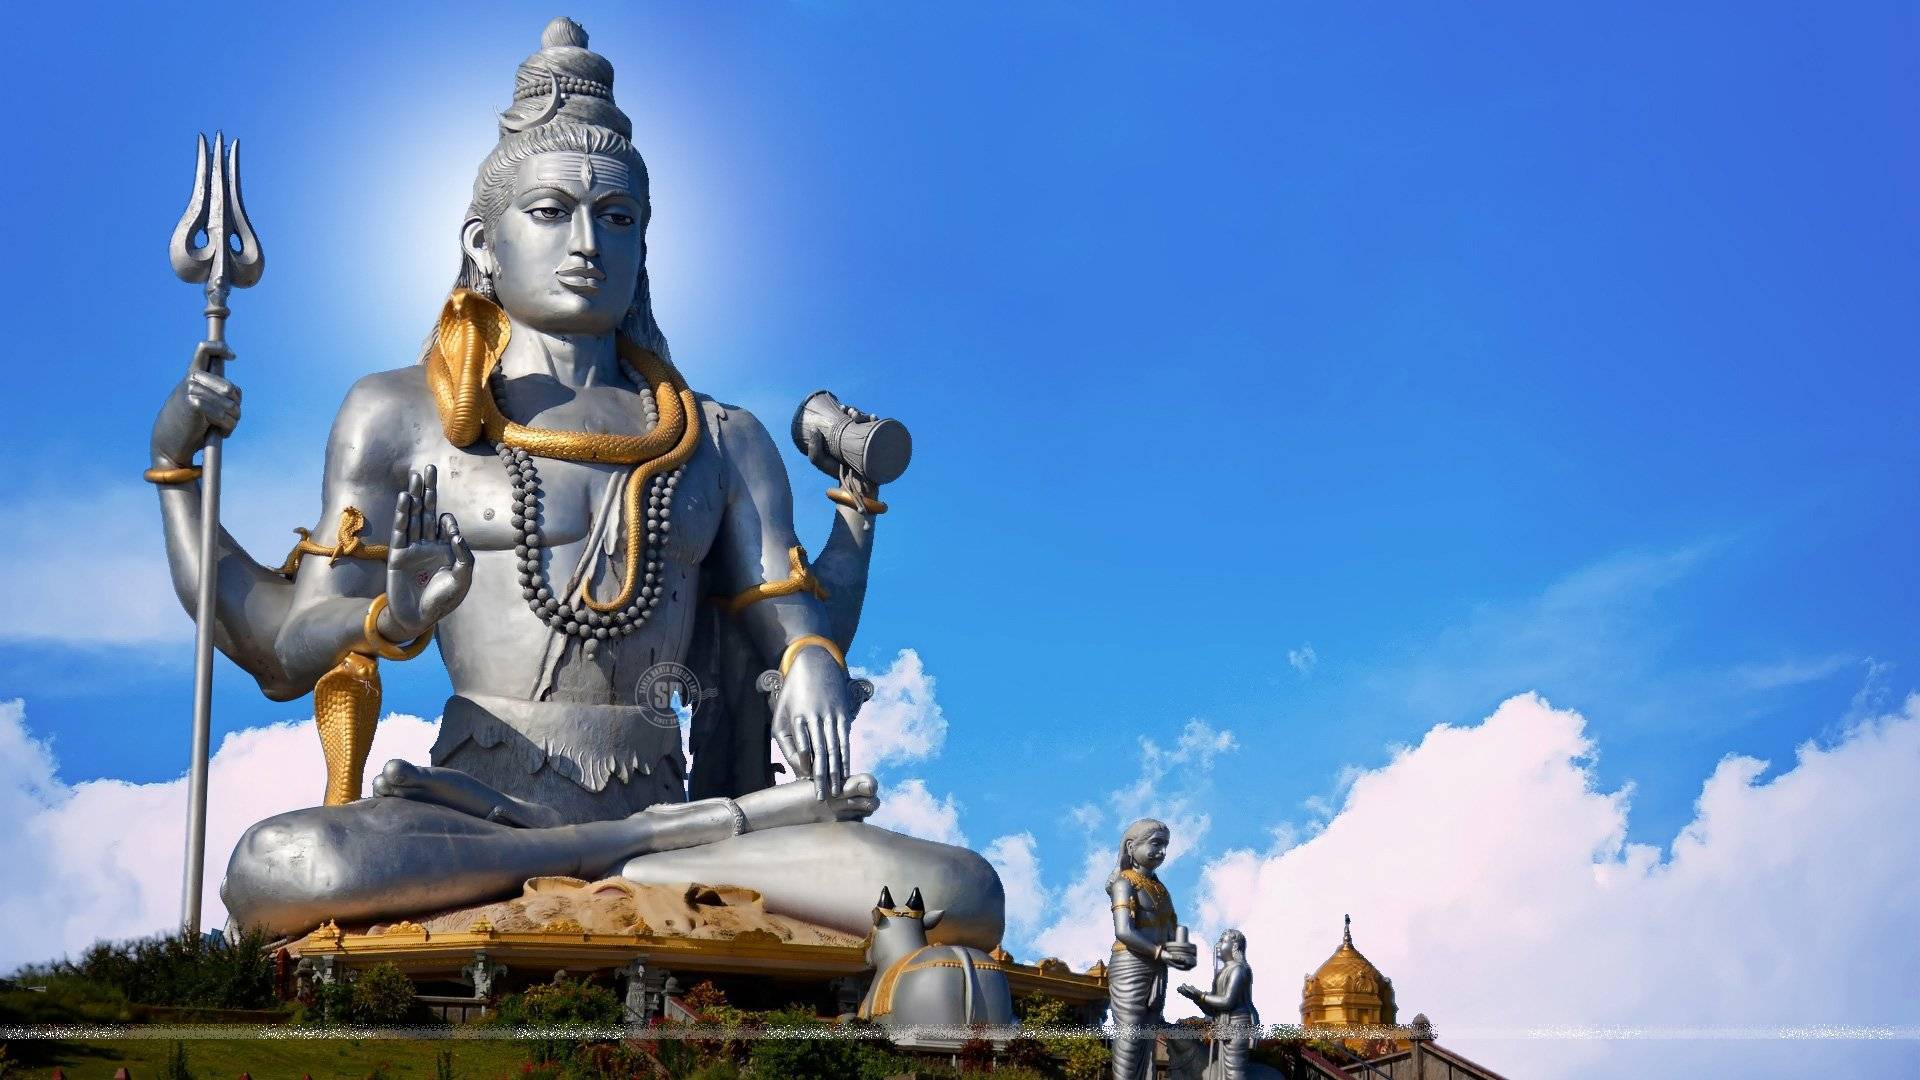 1920x1080 Lord Shiva | Lord Shiva Hd Wallpapers For Android Mobile